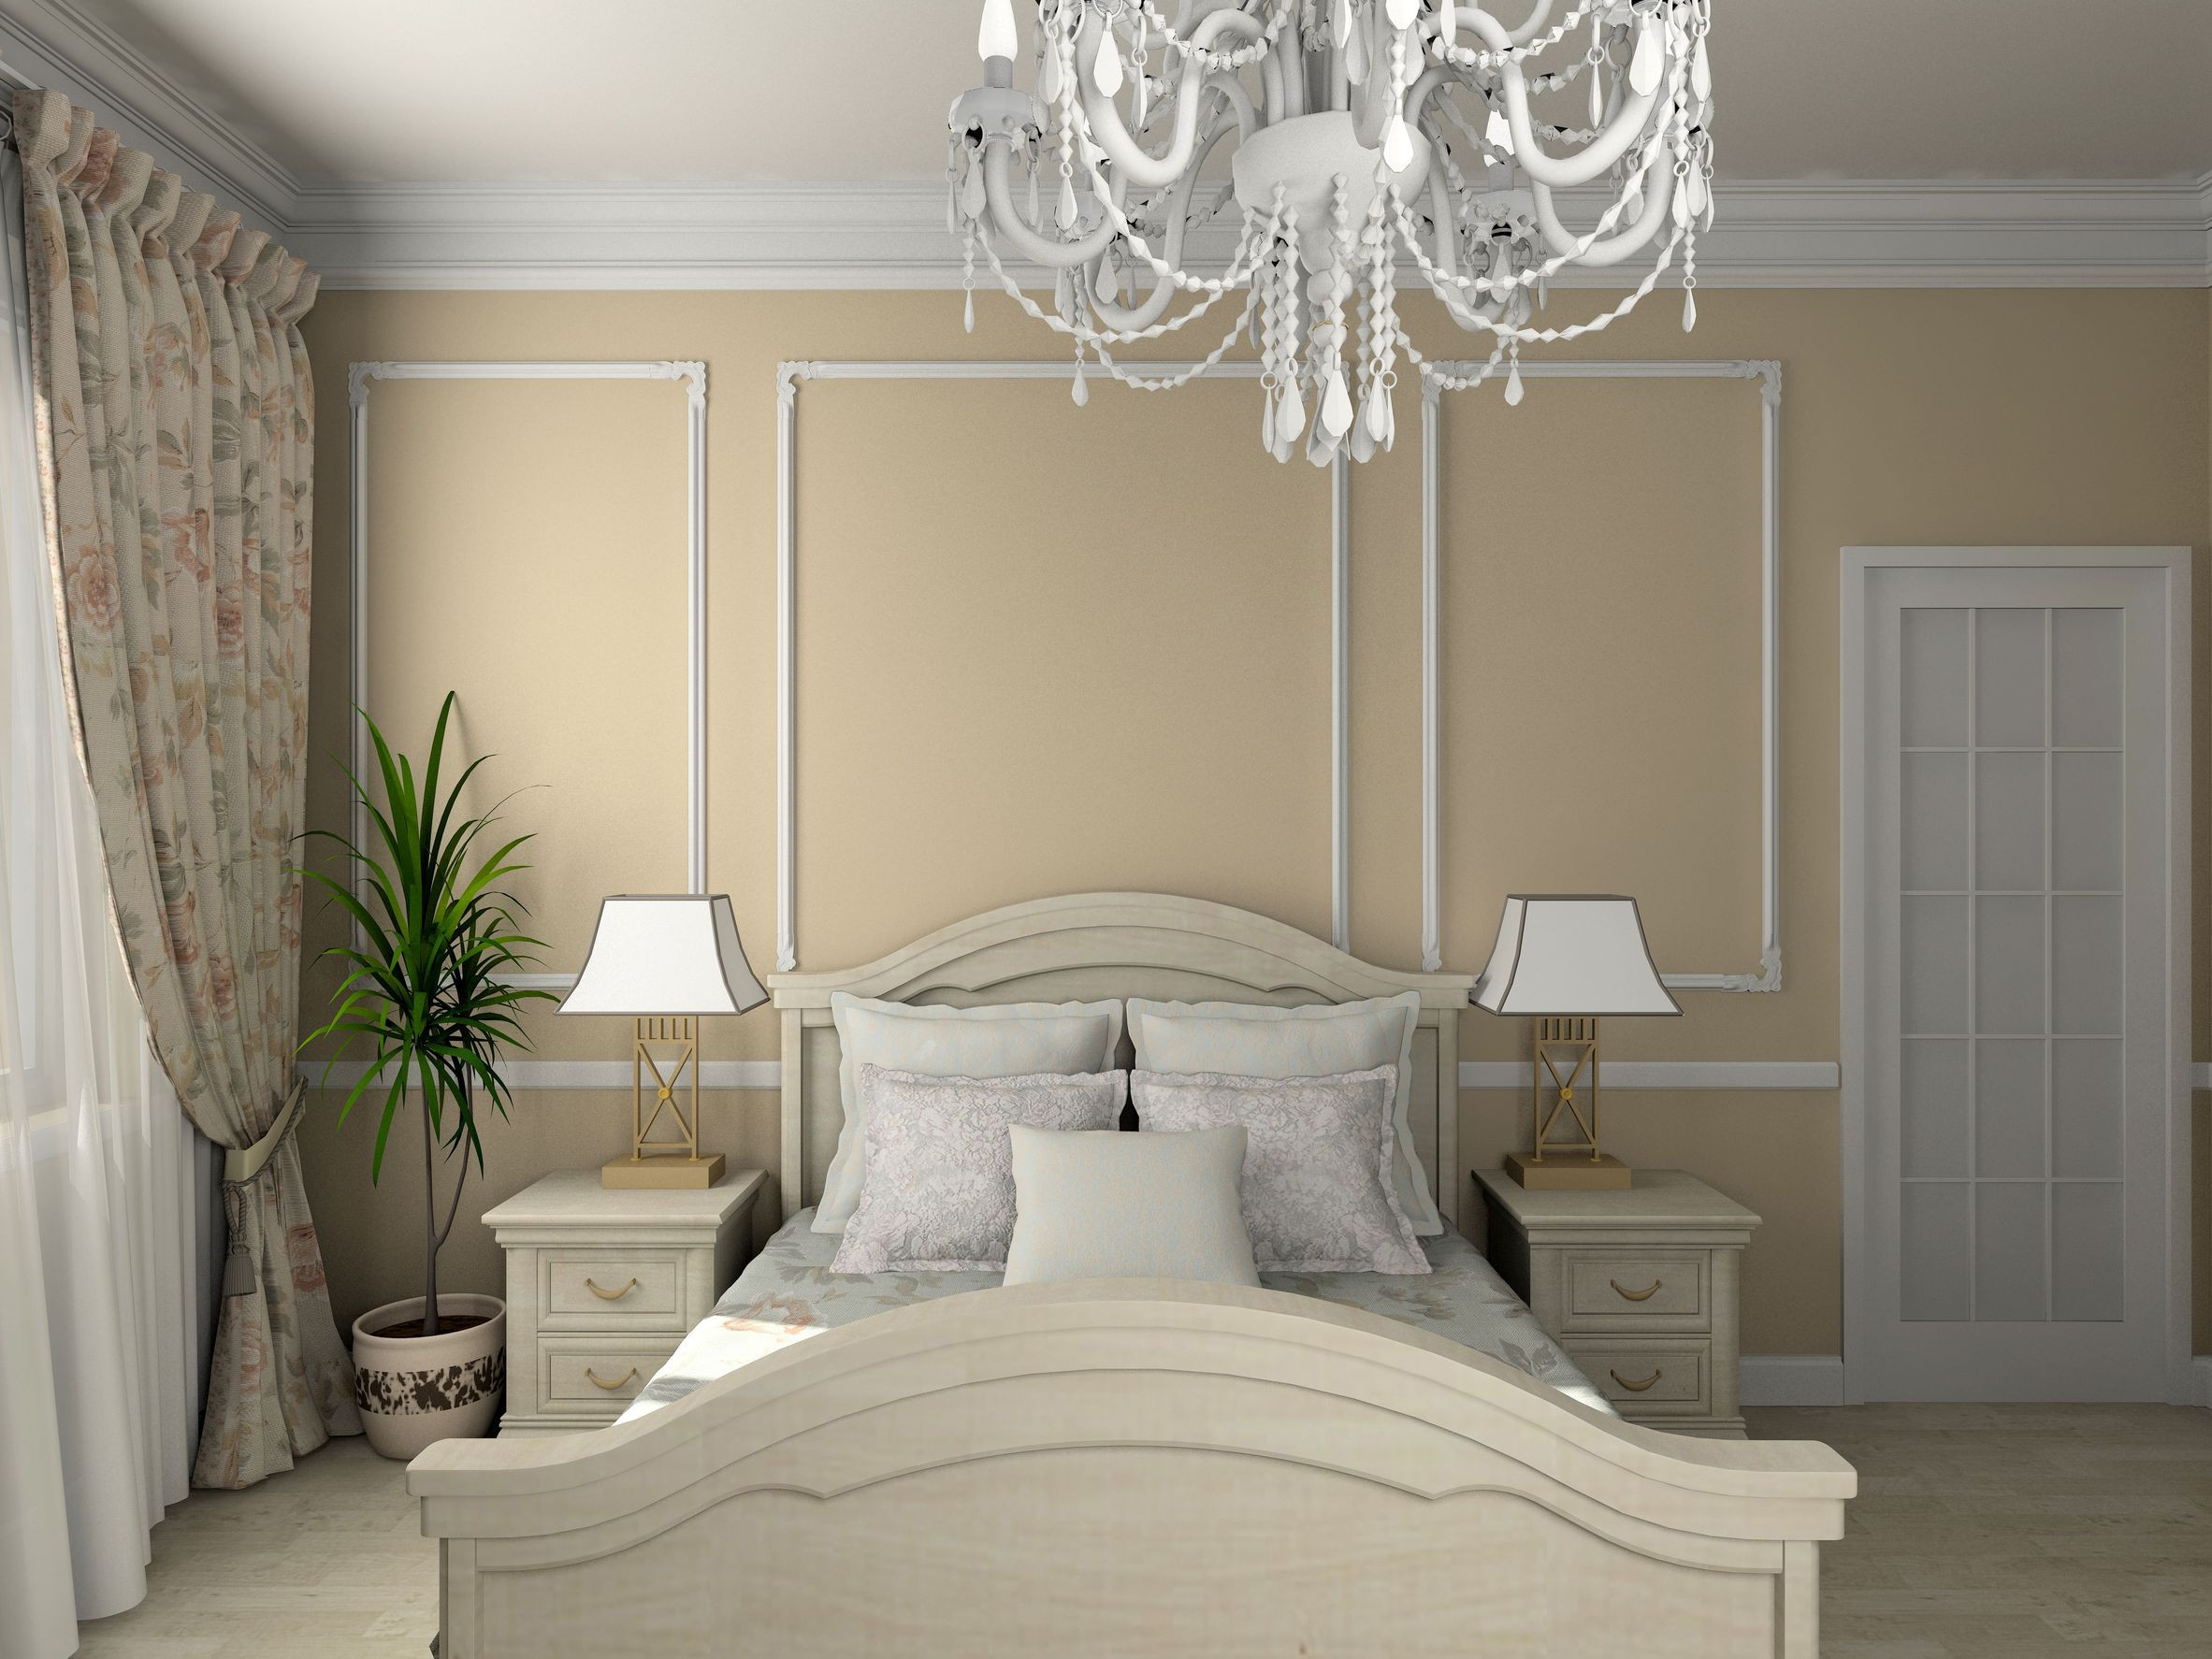 Paint Colors For The Bedroom
 Calming Paint Colors for Bedroom Amaza Design